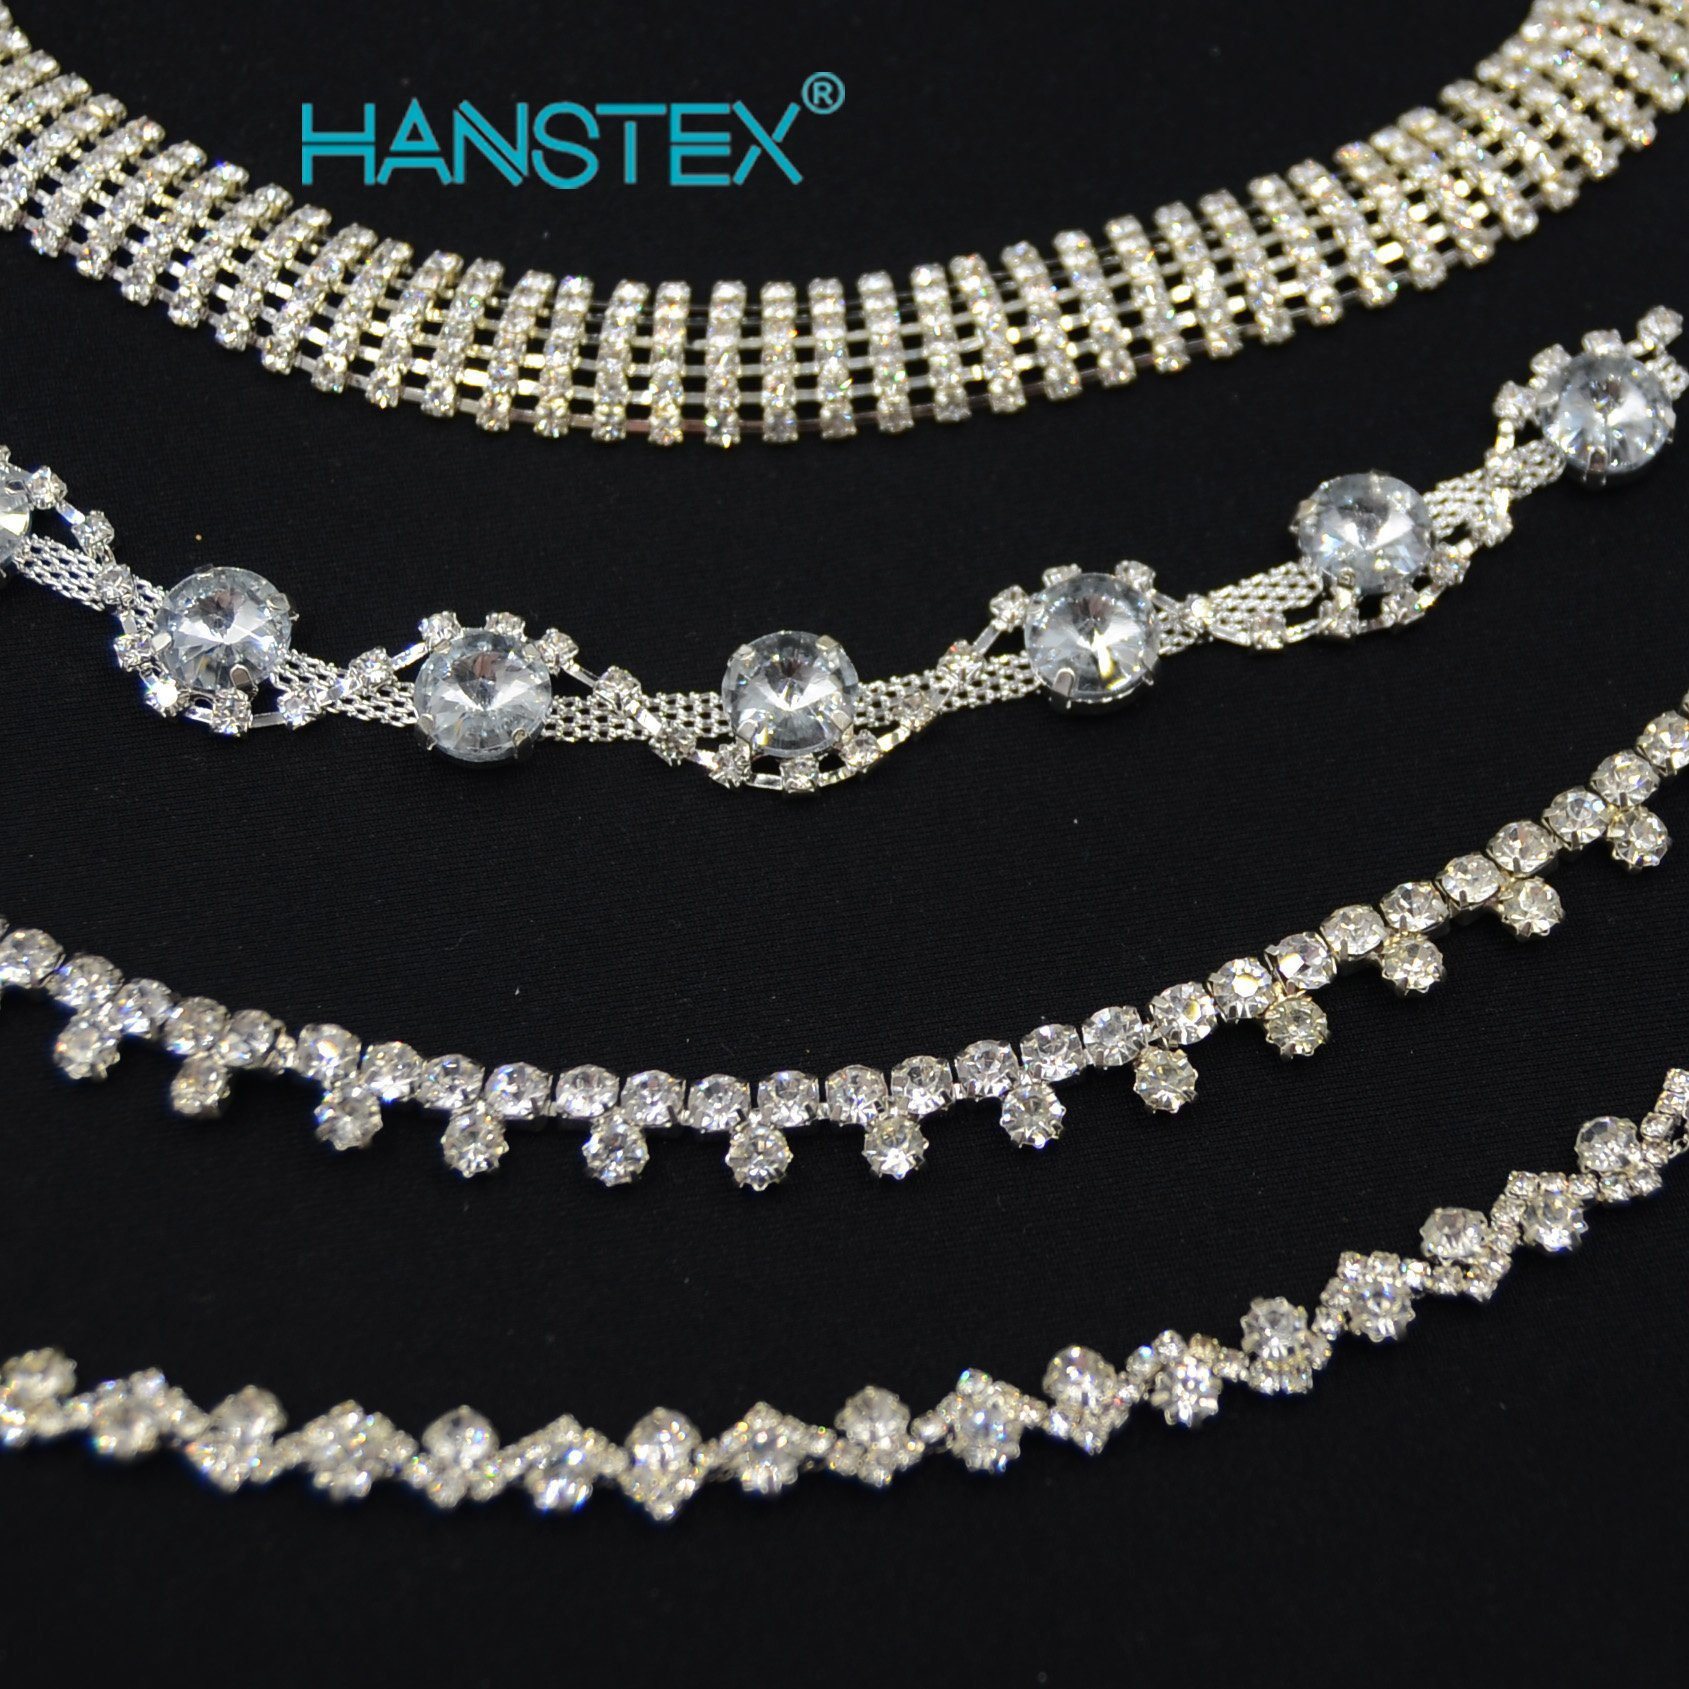 Crystal Rhinestone Cup Chain and Rhinestone Chain Trim Yard for Shoes Clothes